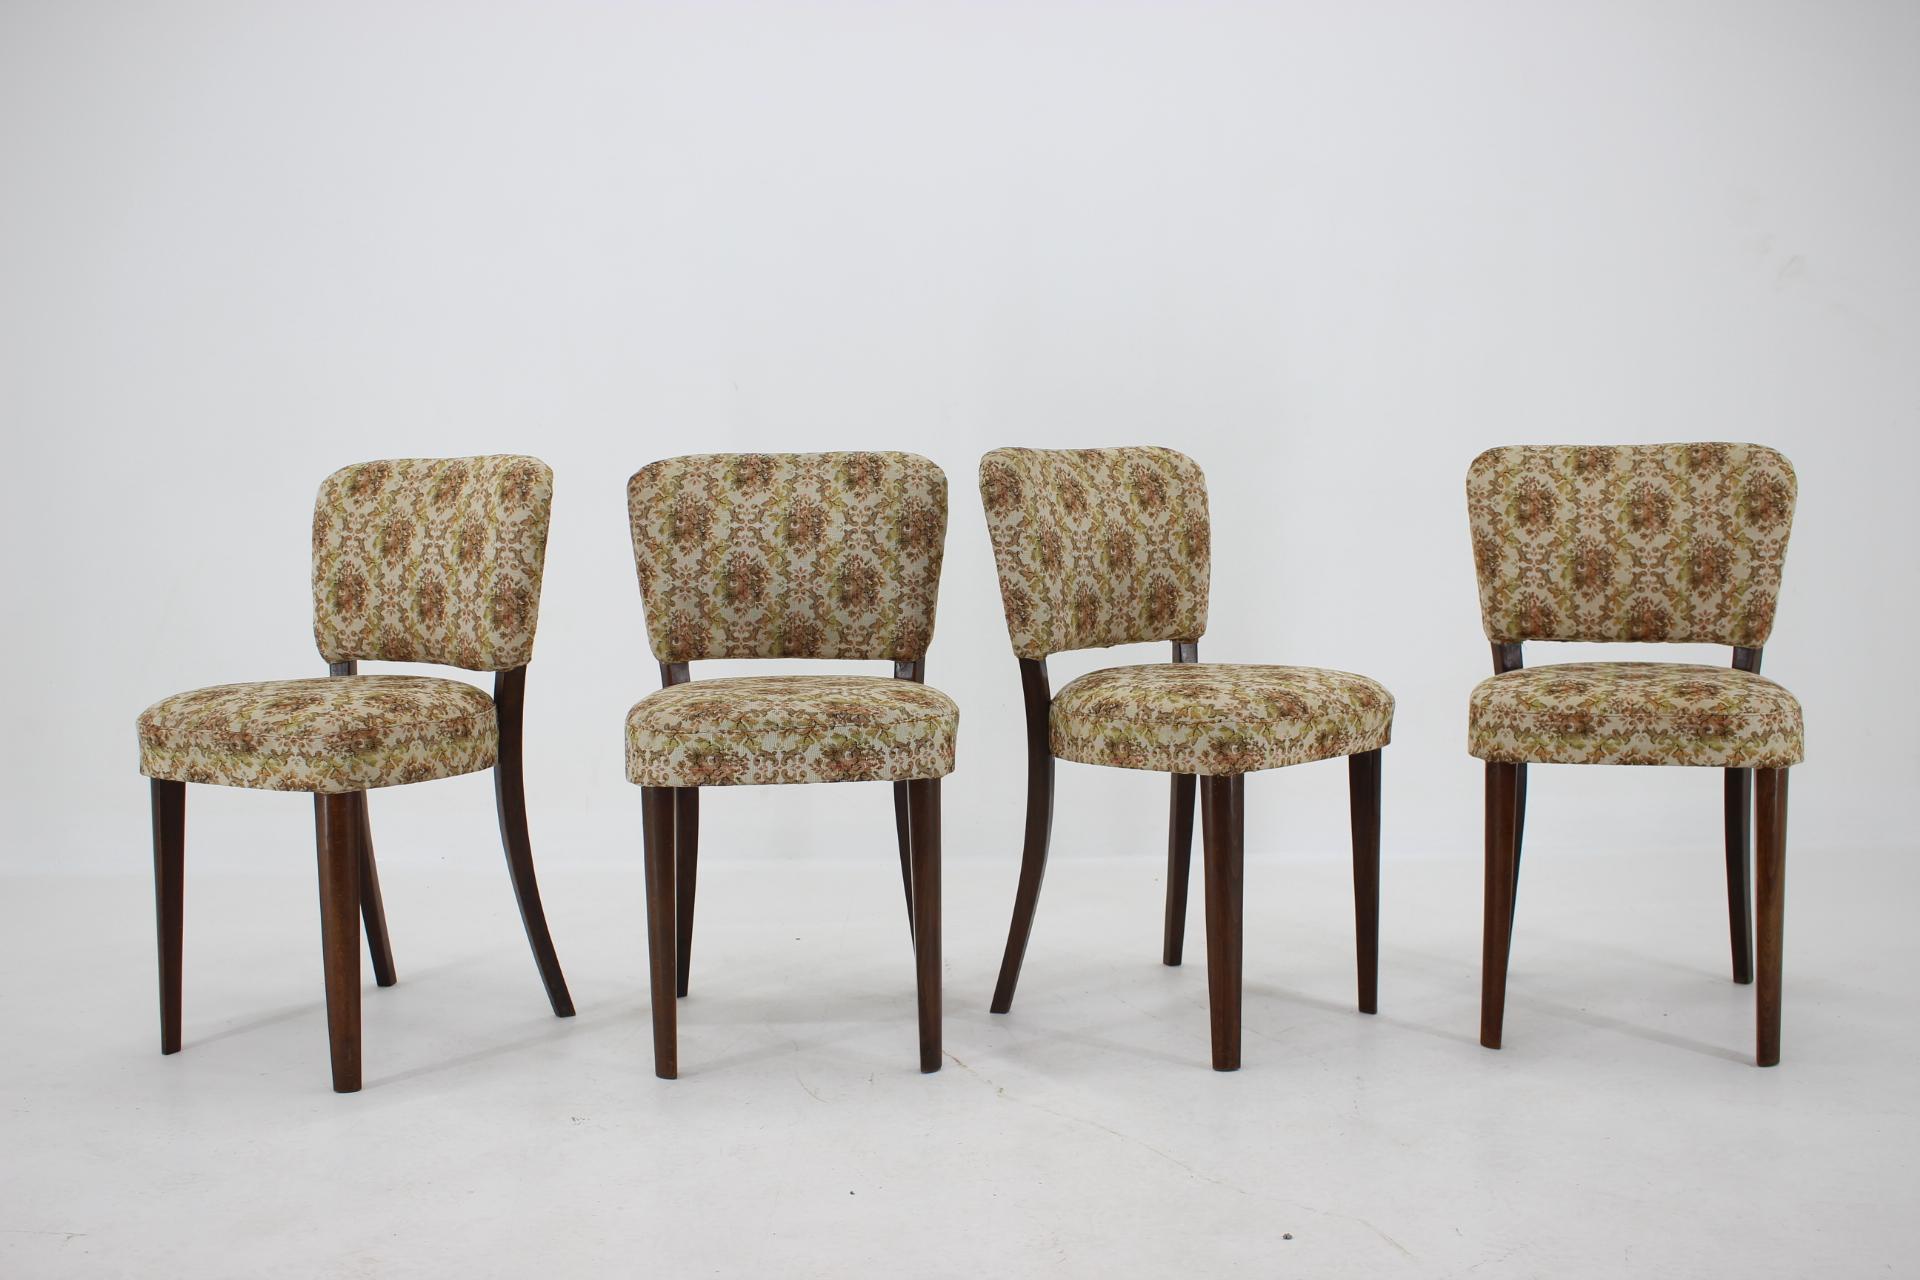 - Good original condition with some signs of use 
- Good original fabric upholstery.